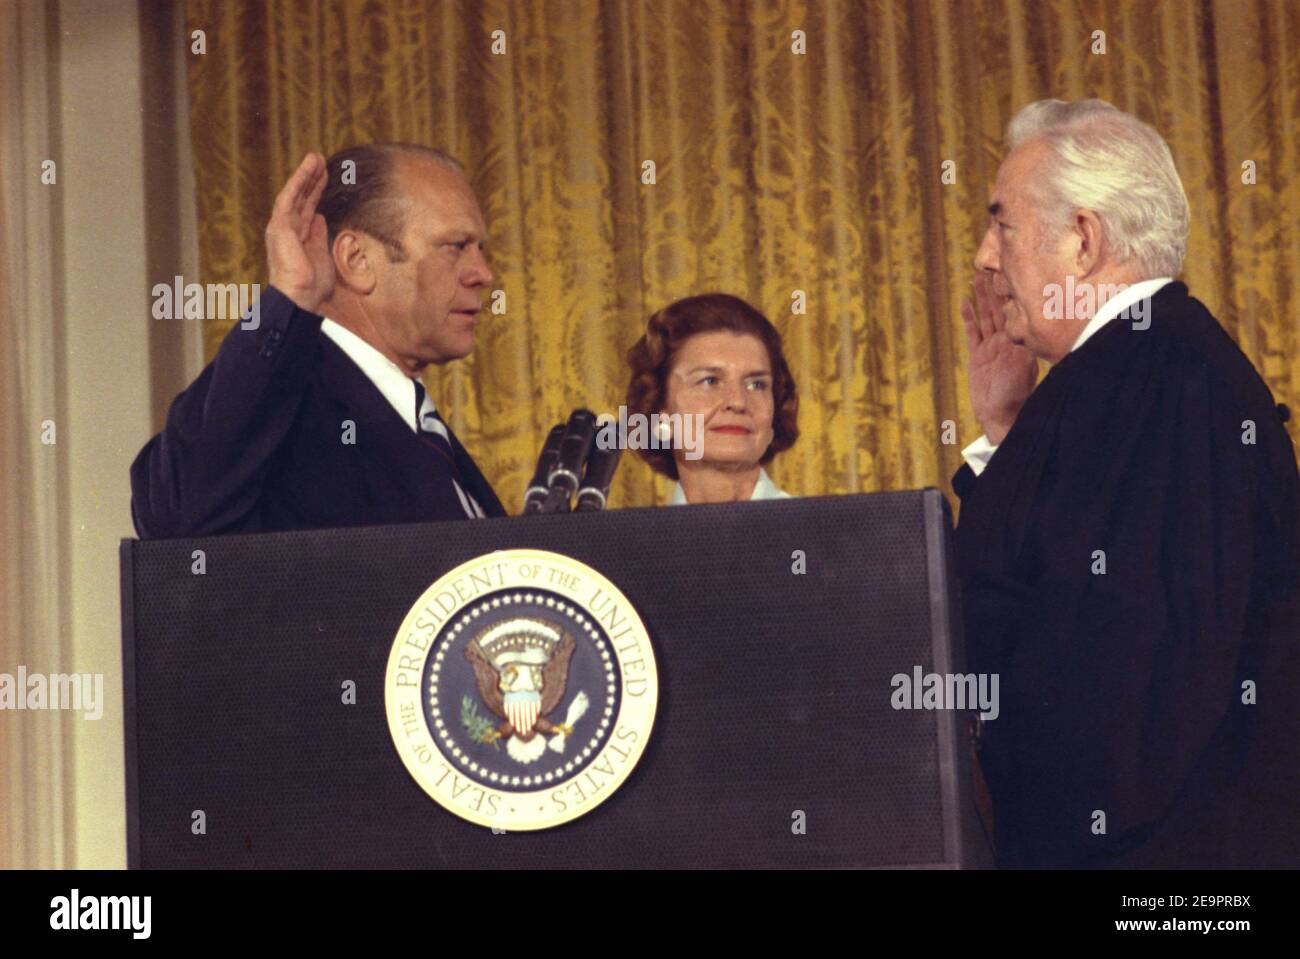 Gerald Ford, the 38th President of the United States, dies at 93, his wife Betty announced in a short statement on December 27, 2006. File Picture from the President's Library. Original Caption : Gerald R. Ford is sworn in as the 38th President of the United States. Photo Gerald R Ford Library via ABACAPRESS.COM Stock Photo